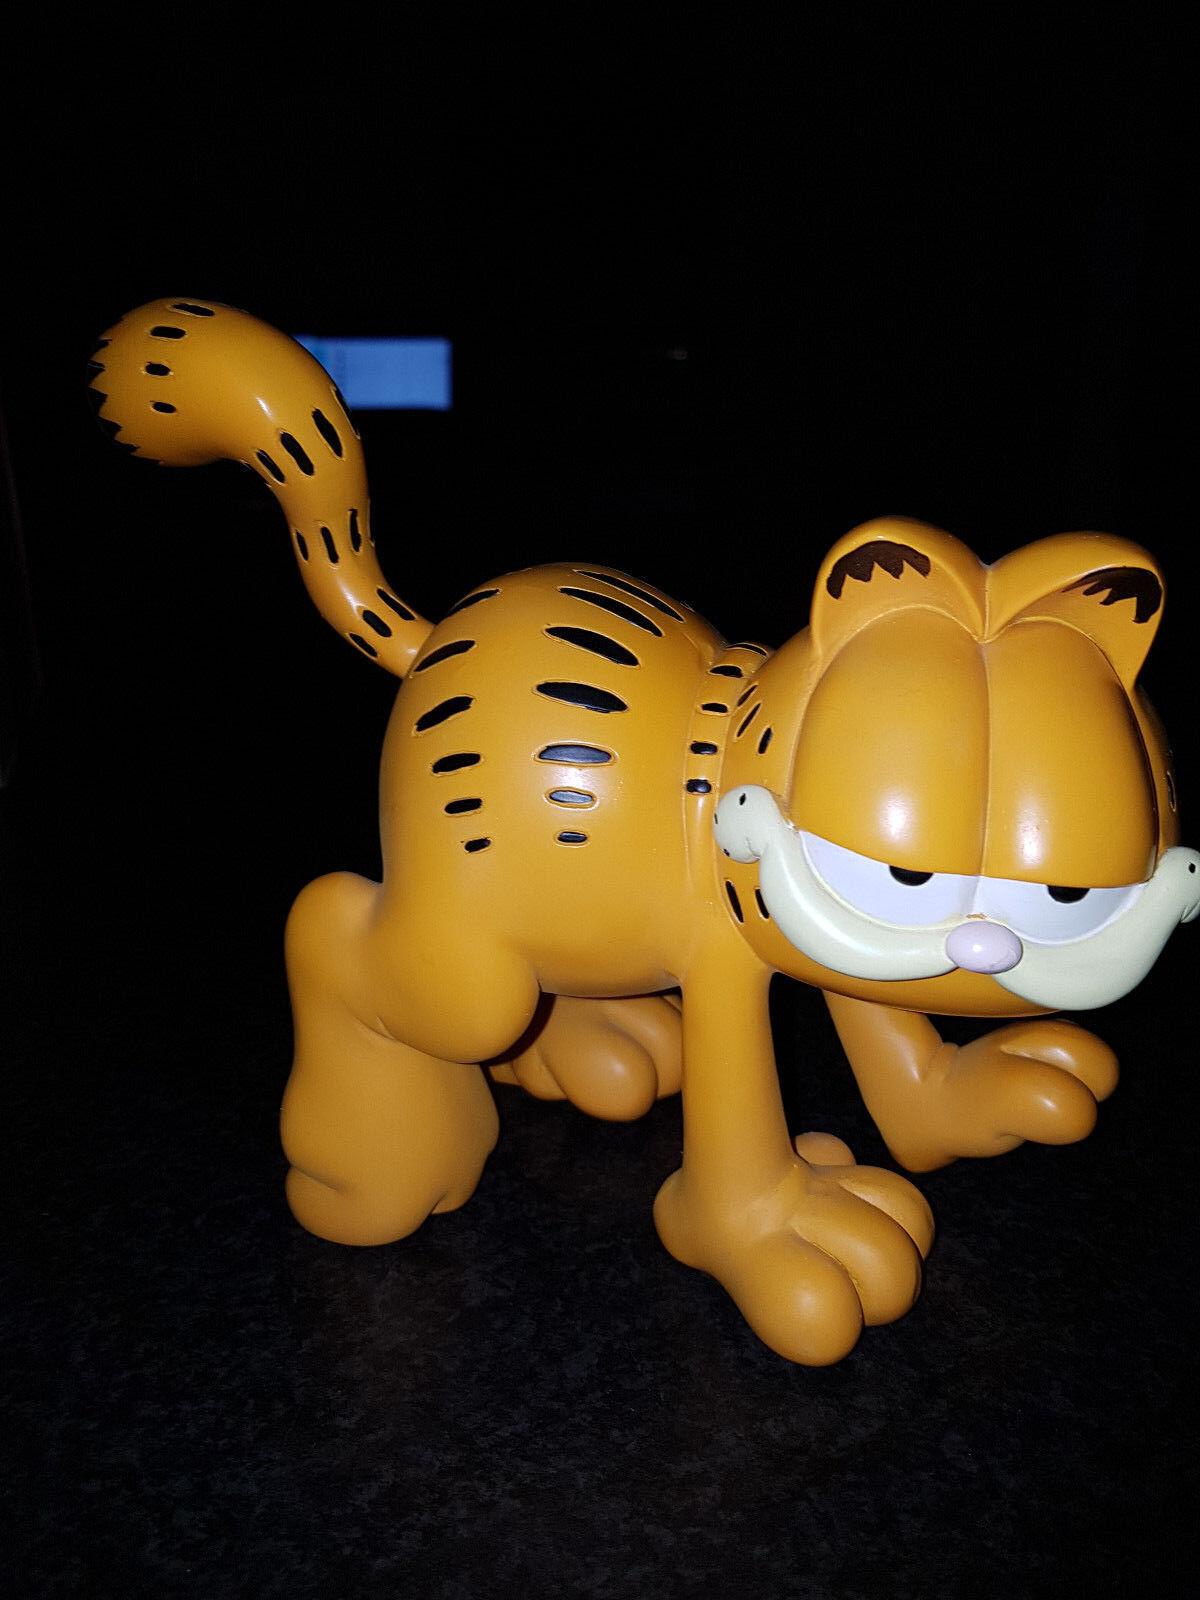 Extremely Rare Garfield Sneaking Vintage Figurine Statue